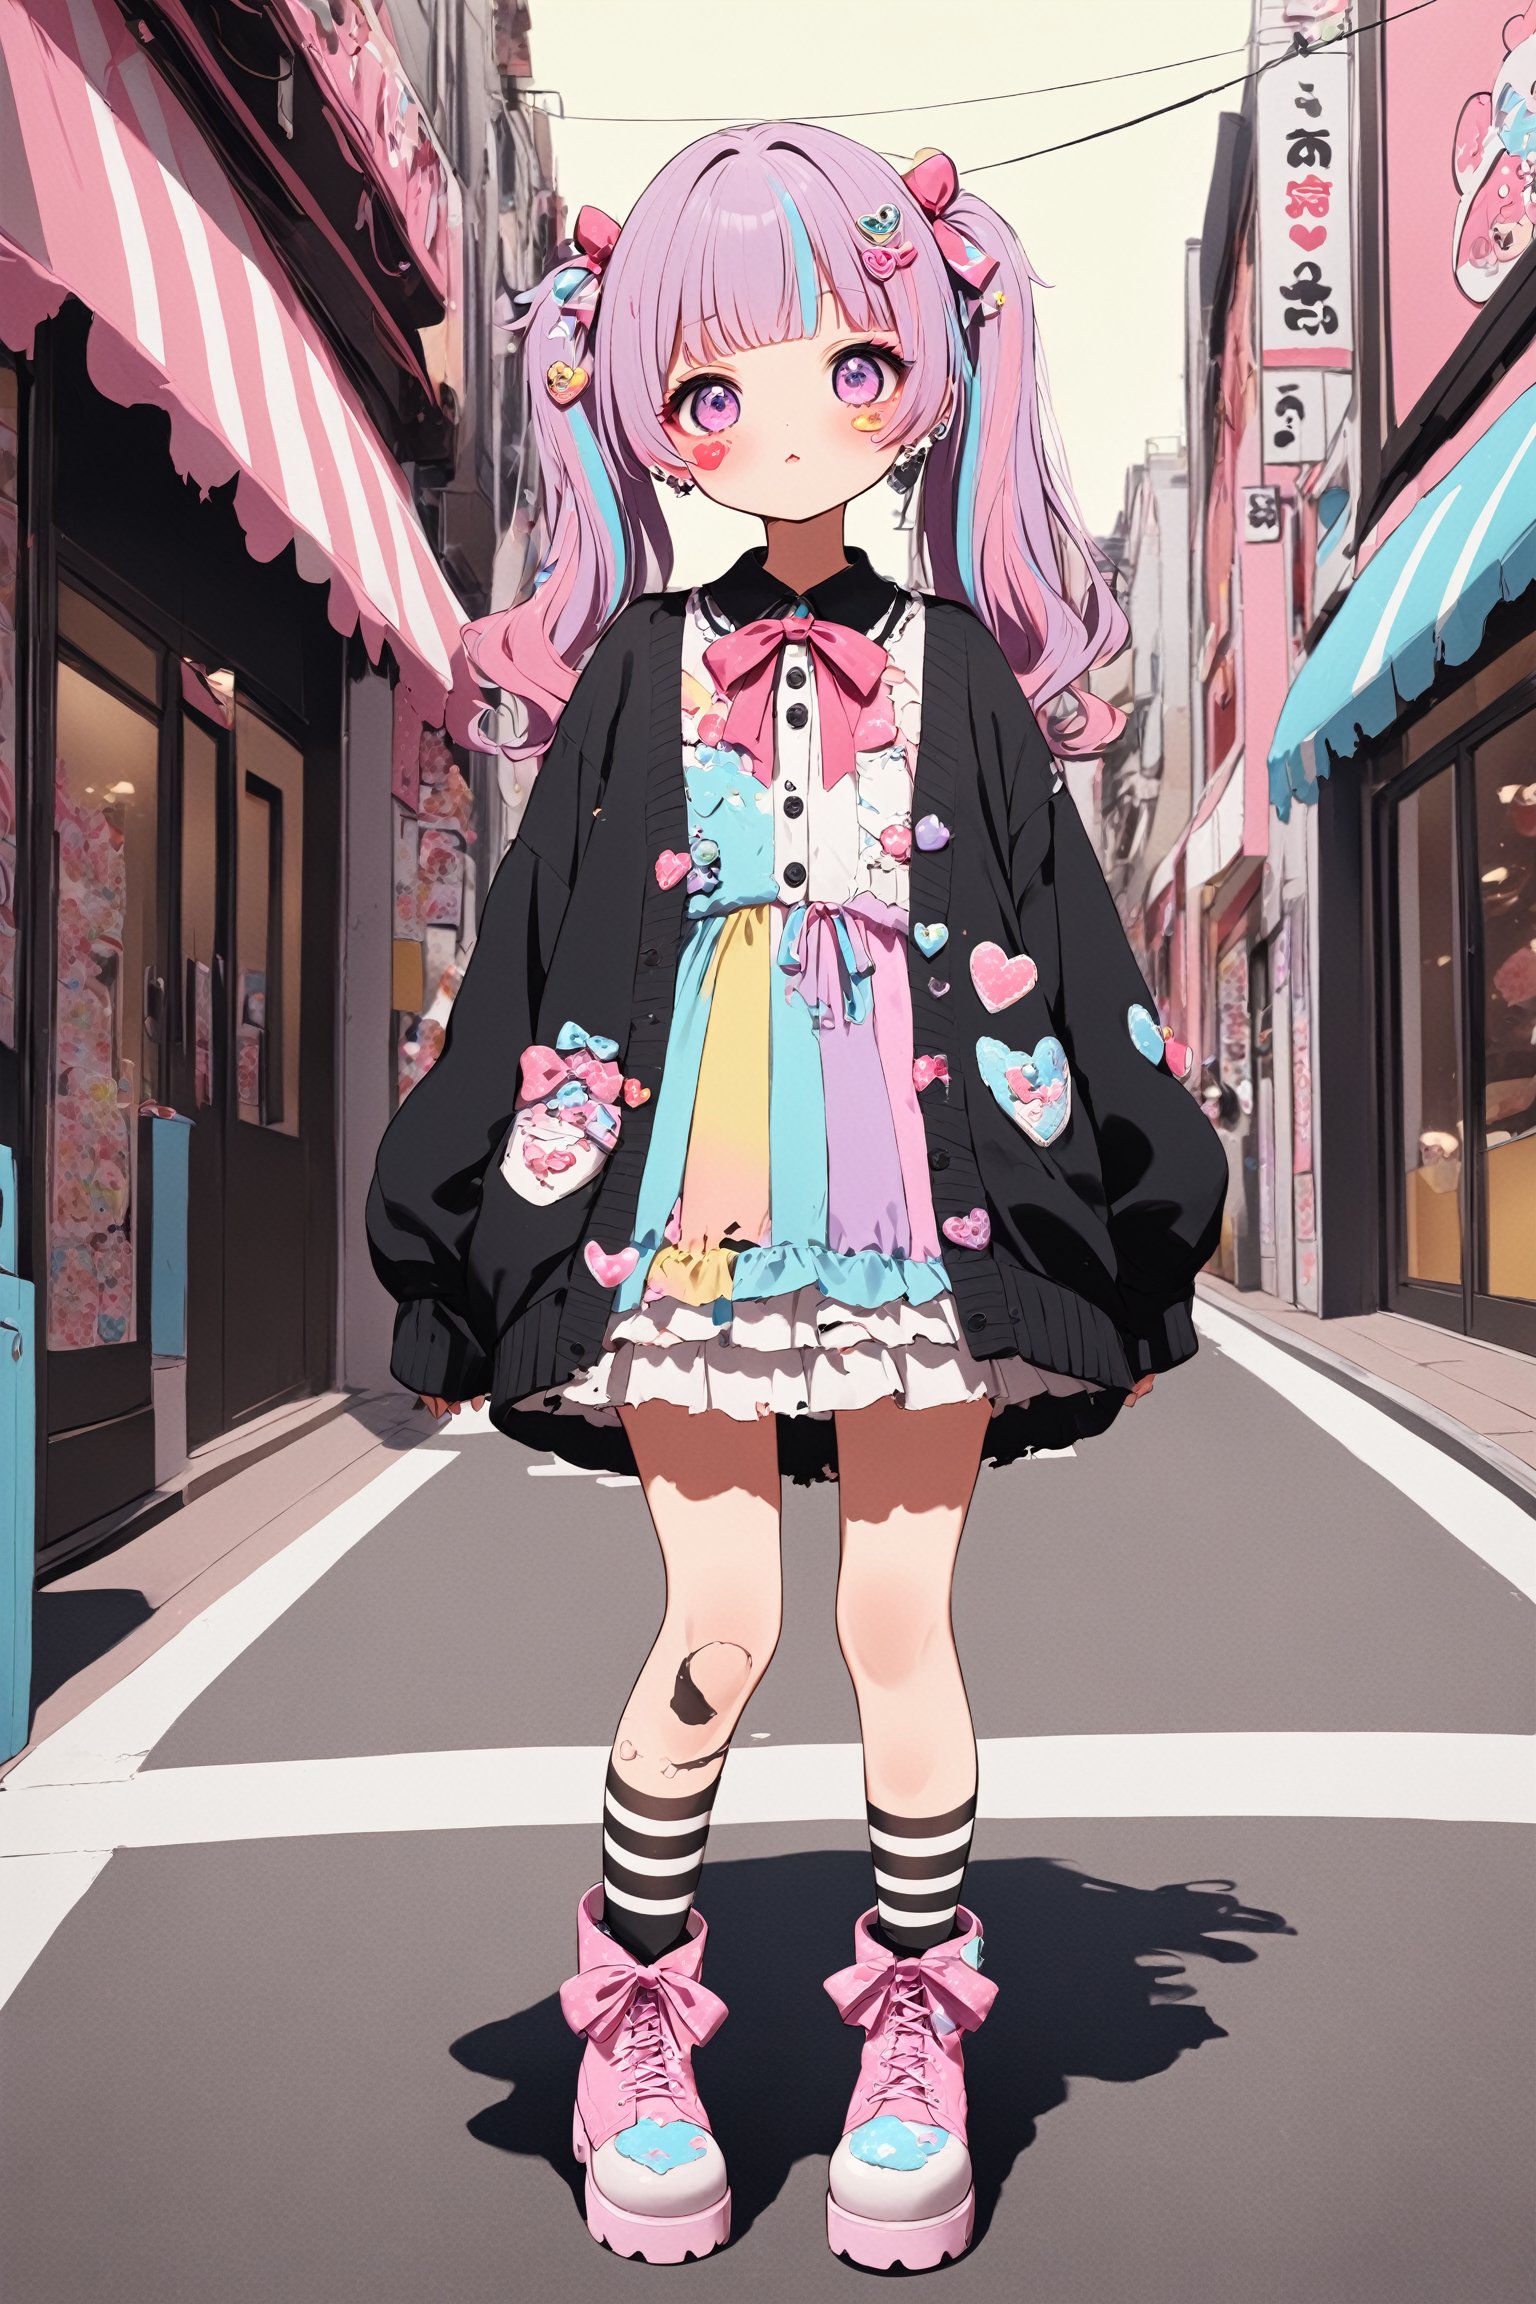 1girl,ultra cute,
Harajuku Style grunge fashion with kawaii and Lolita themes. She wears a distressed pastel dress with lace, an oversized torn cardigan, and chunky Combat boots, Her pastel-streaked pigtails are adorned with bows and clips, and her makeup features glitter and heart-shaped stickers. She stands in a vibrant Harajuku street, blending sweetness with a rebellious edge.,Ground Mine Girl